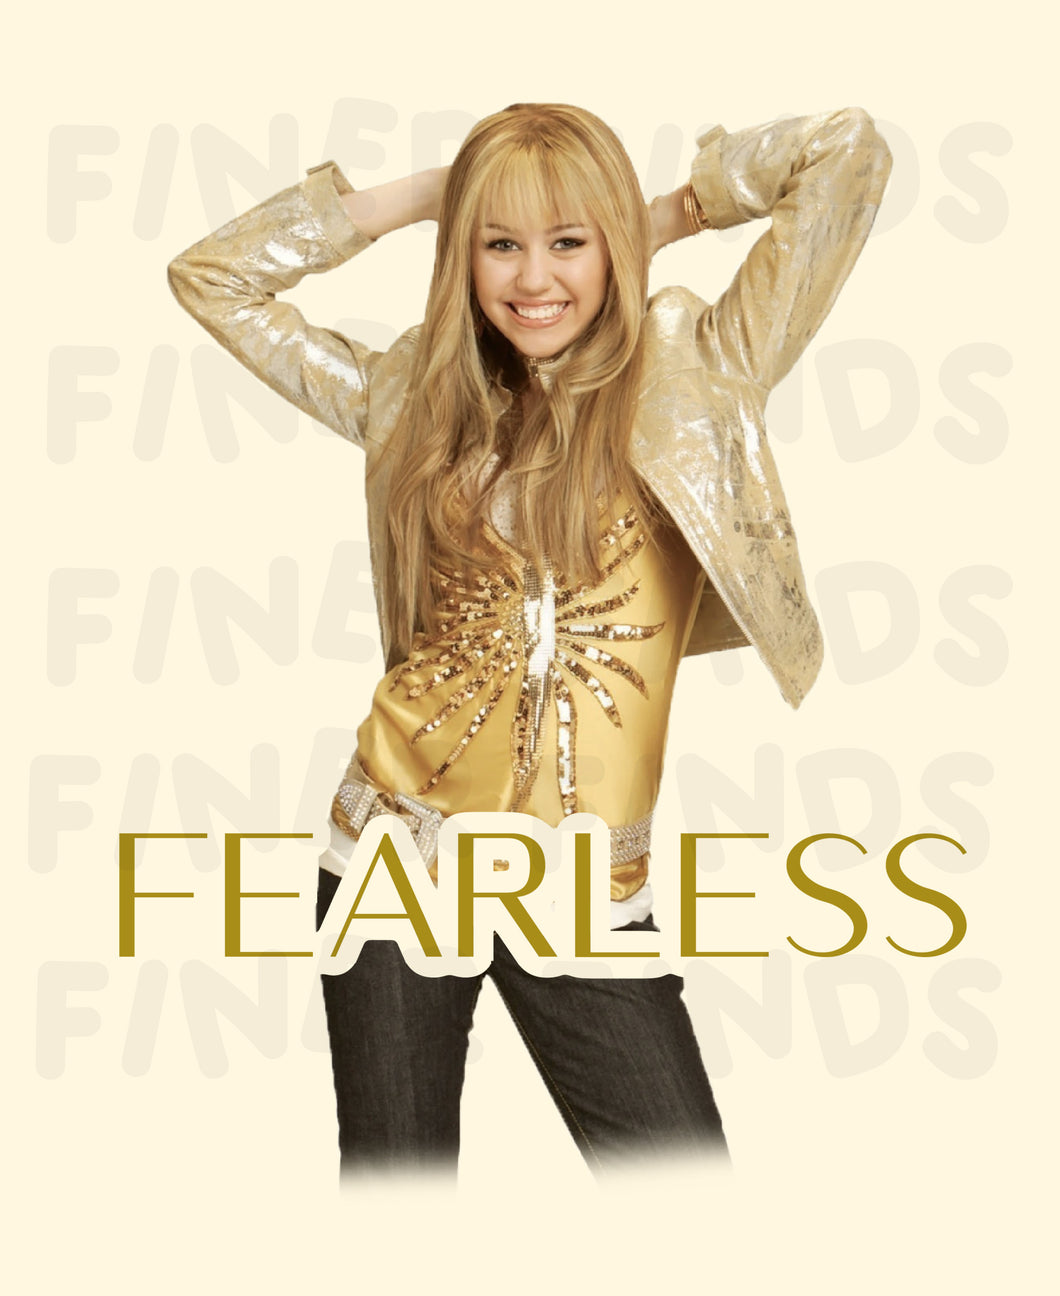 The HM Fearless Poster